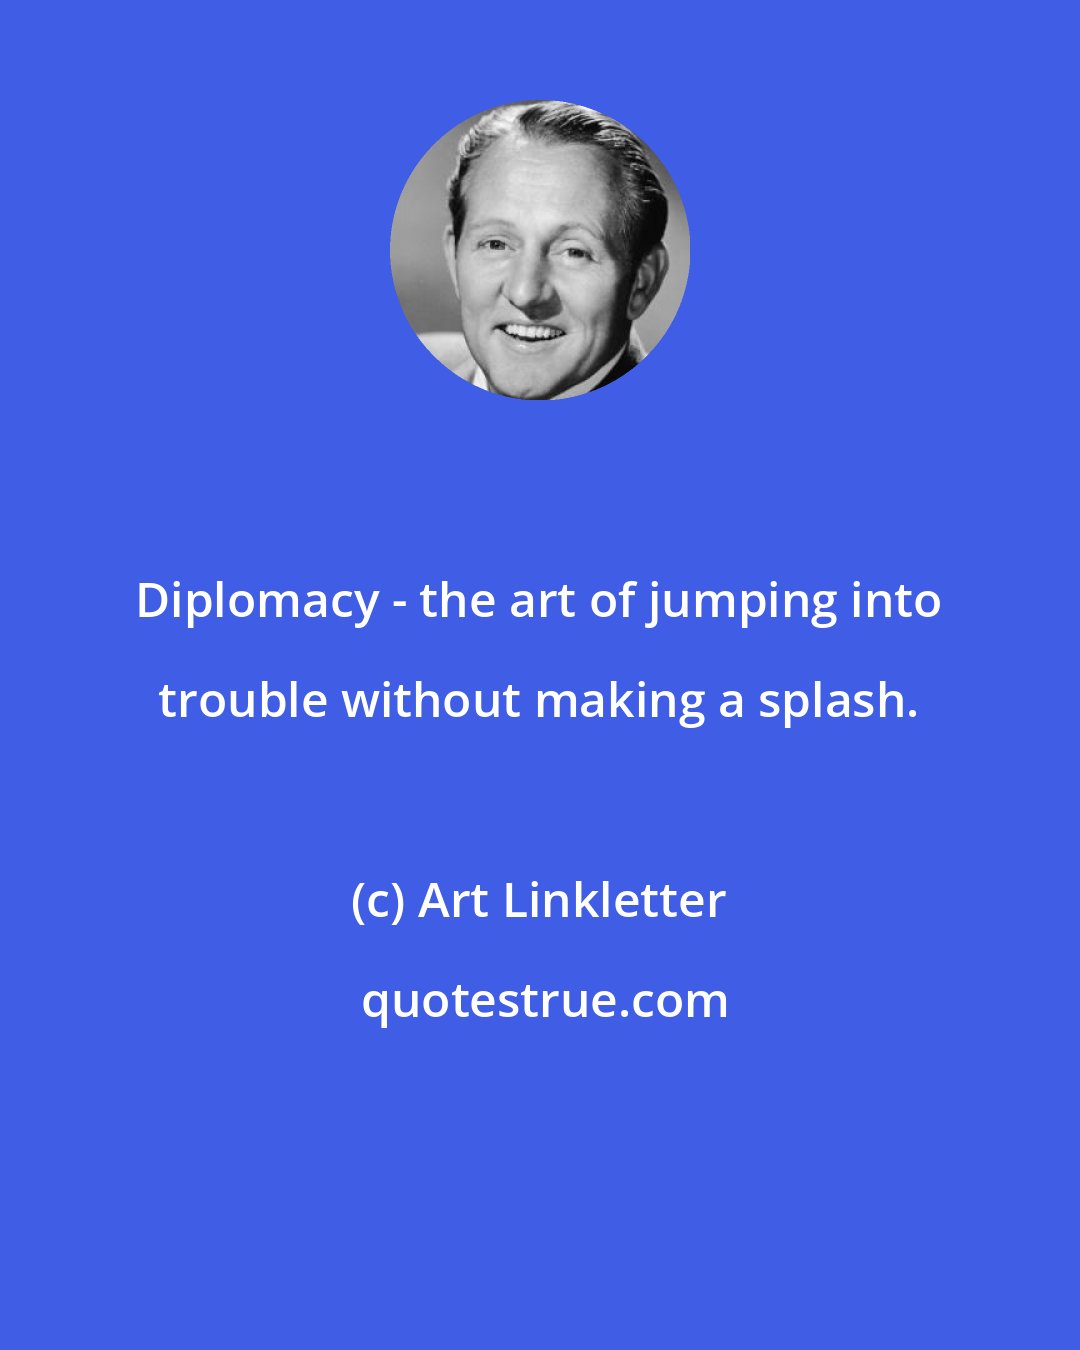 Art Linkletter: Diplomacy - the art of jumping into trouble without making a splash.